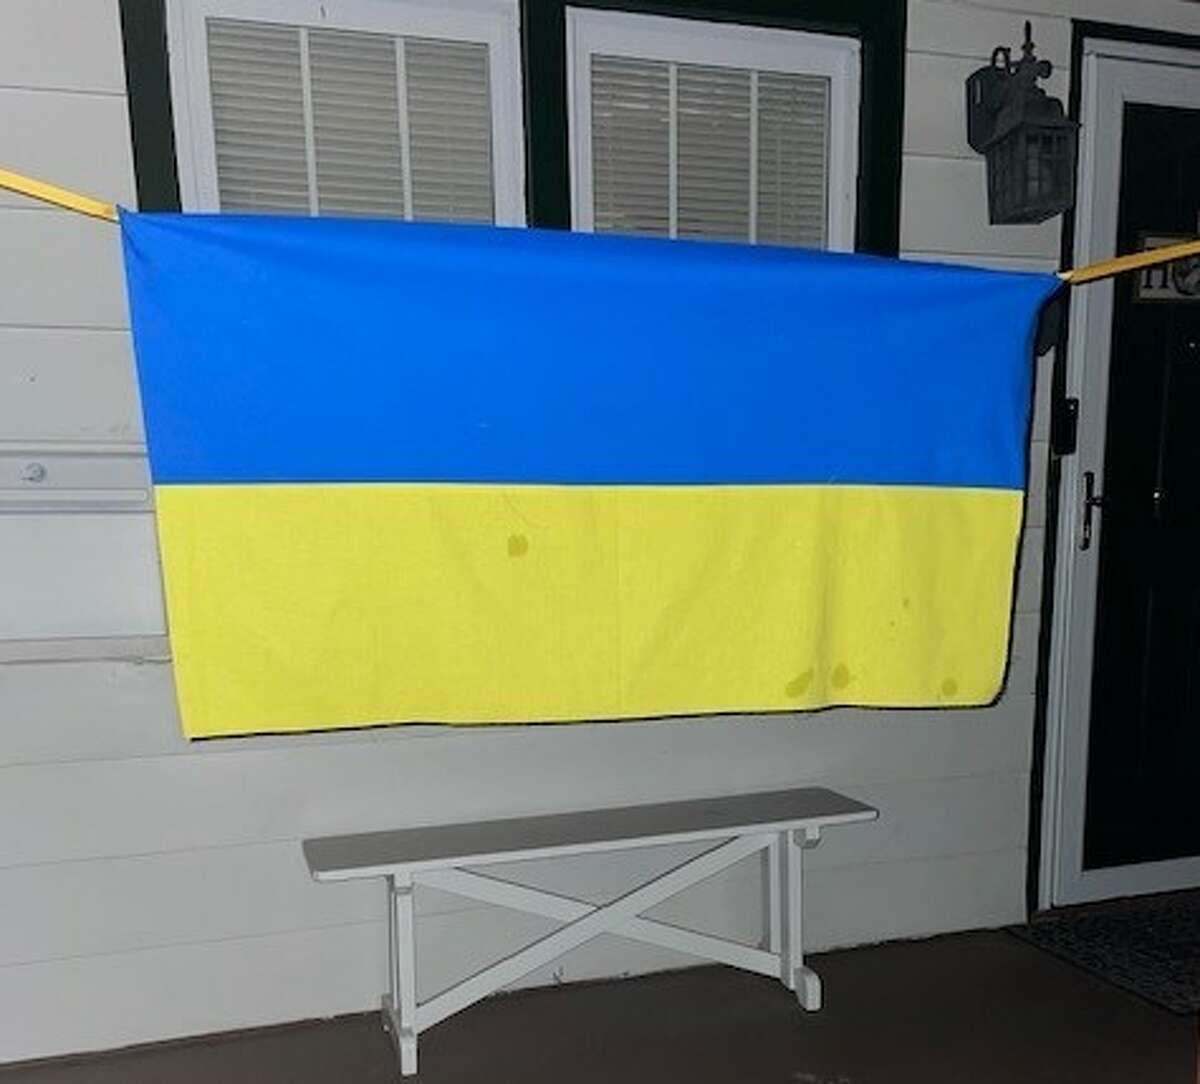 International support of Ukraine residents includes the Riverbend, as Kathi Cooper in Bethalto posted a quickly made Ukrainian flag on her front porch amid news of the Russian invasion. "I don’t know how else to show my love and support," Cooper said.